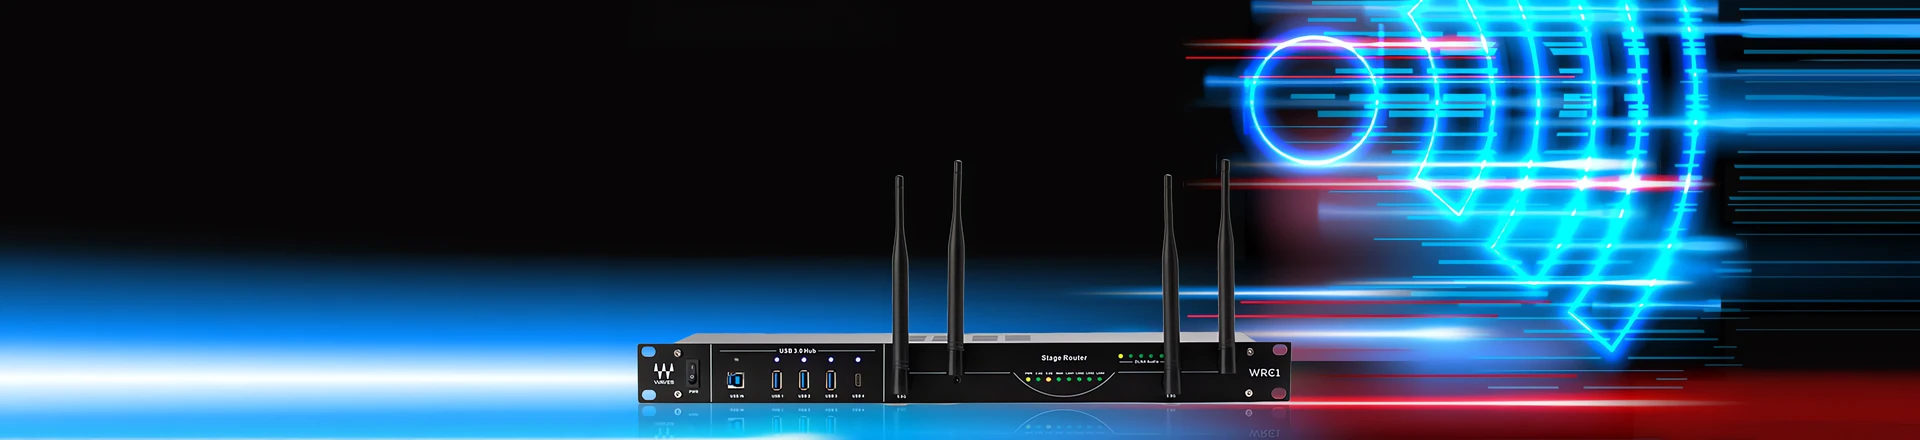 WRC-1 WiFi Stage Router - Router na scenę od Waves